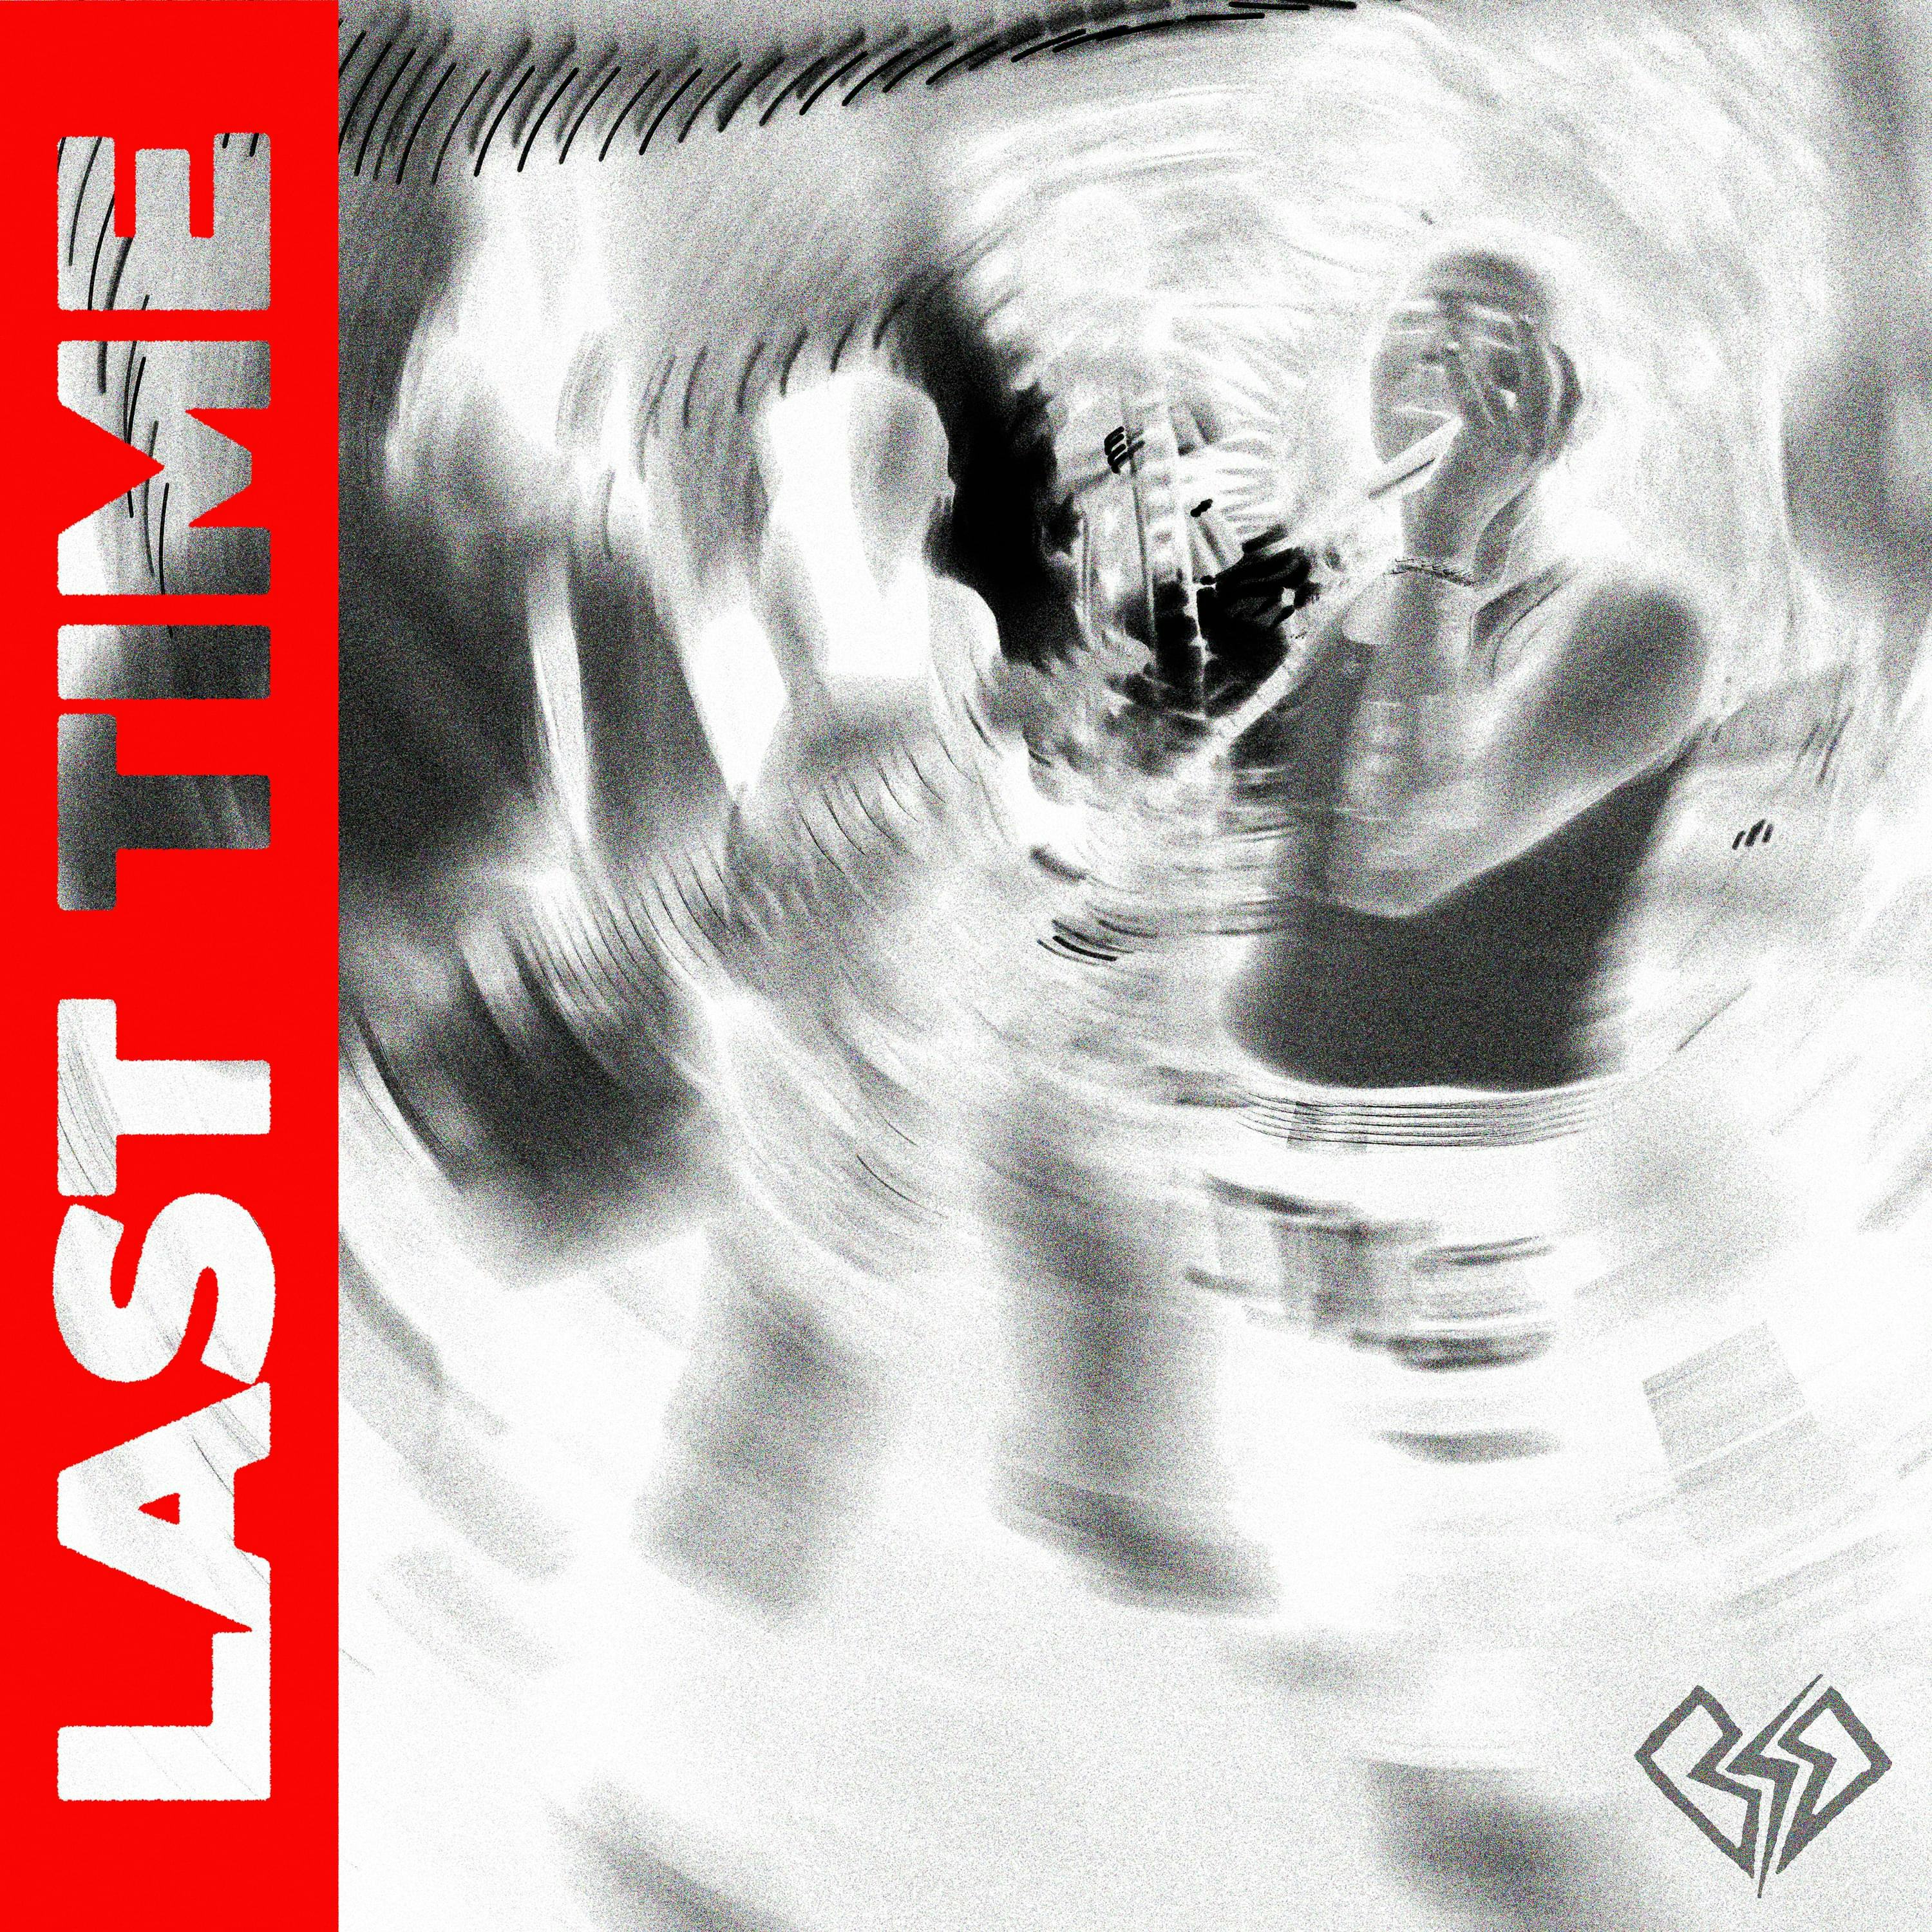 Cover art for Last Time by Beauty School Dropout